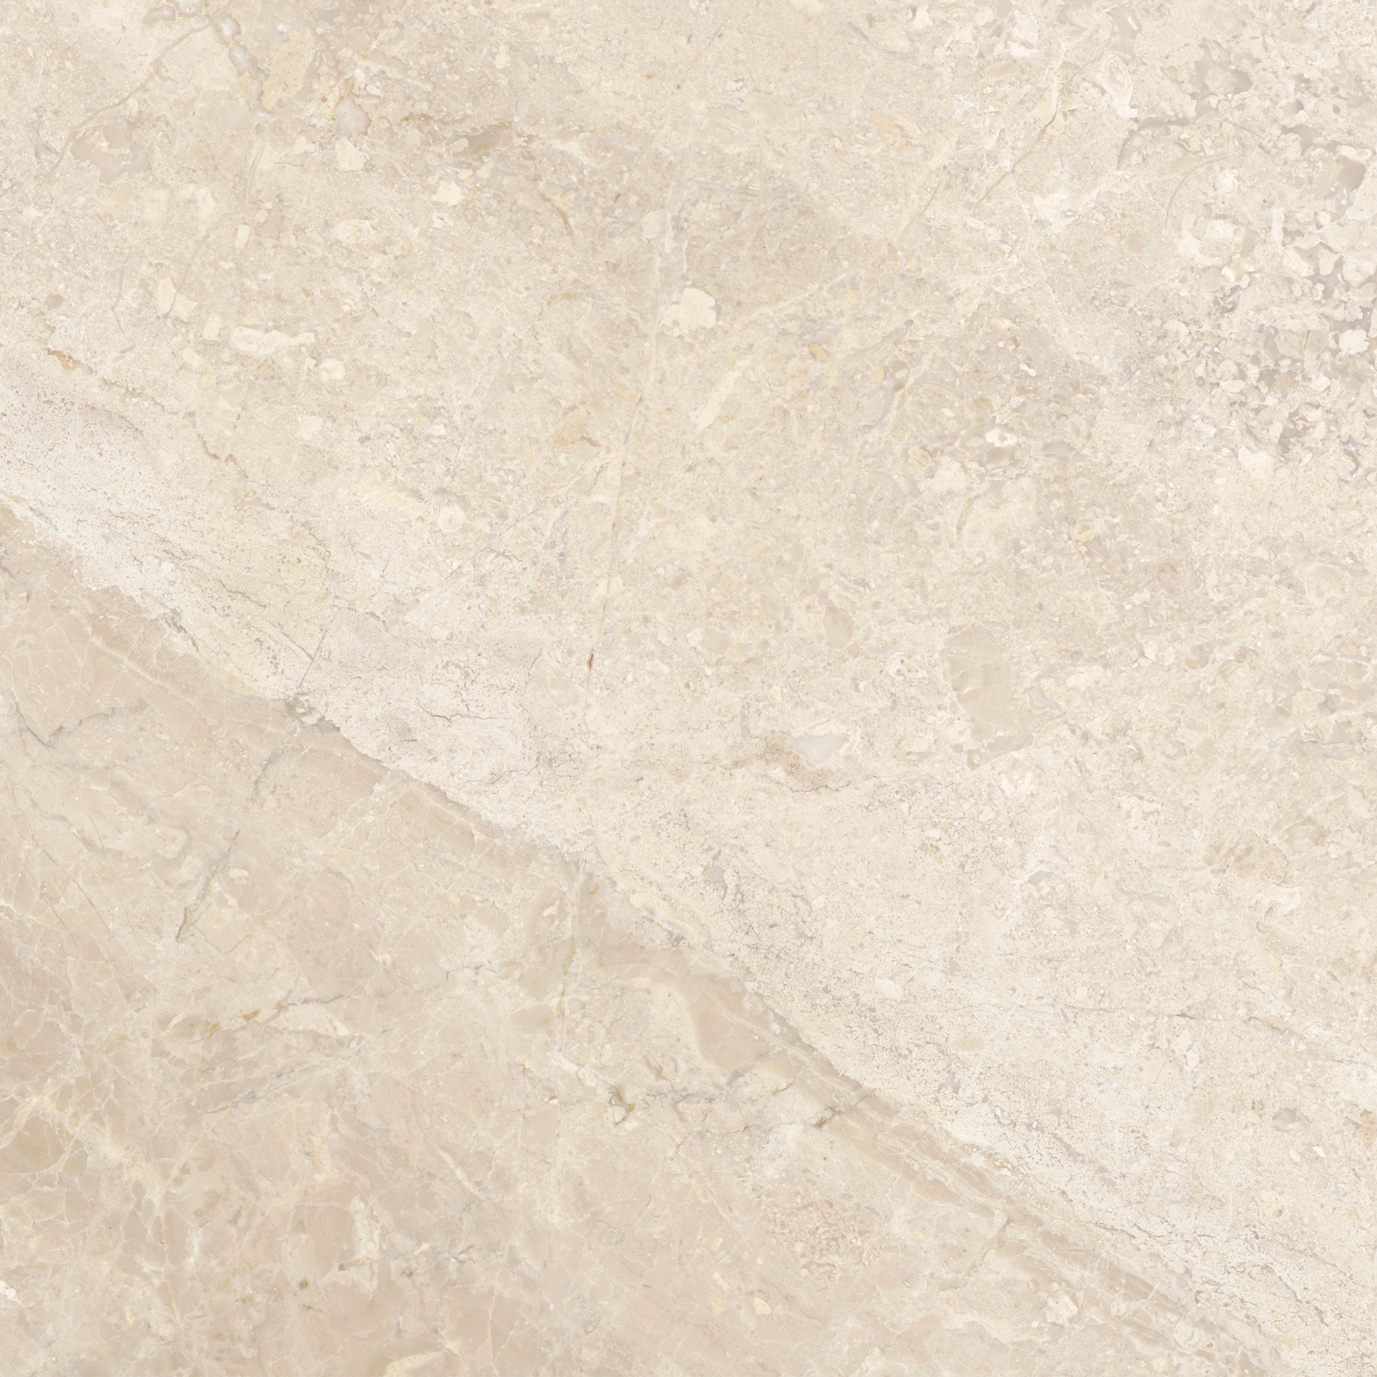 marble pattern natural stone field tile from impero reale anatolia collection distributed by surface group international honed finish straight edge edge 12x12 square shape